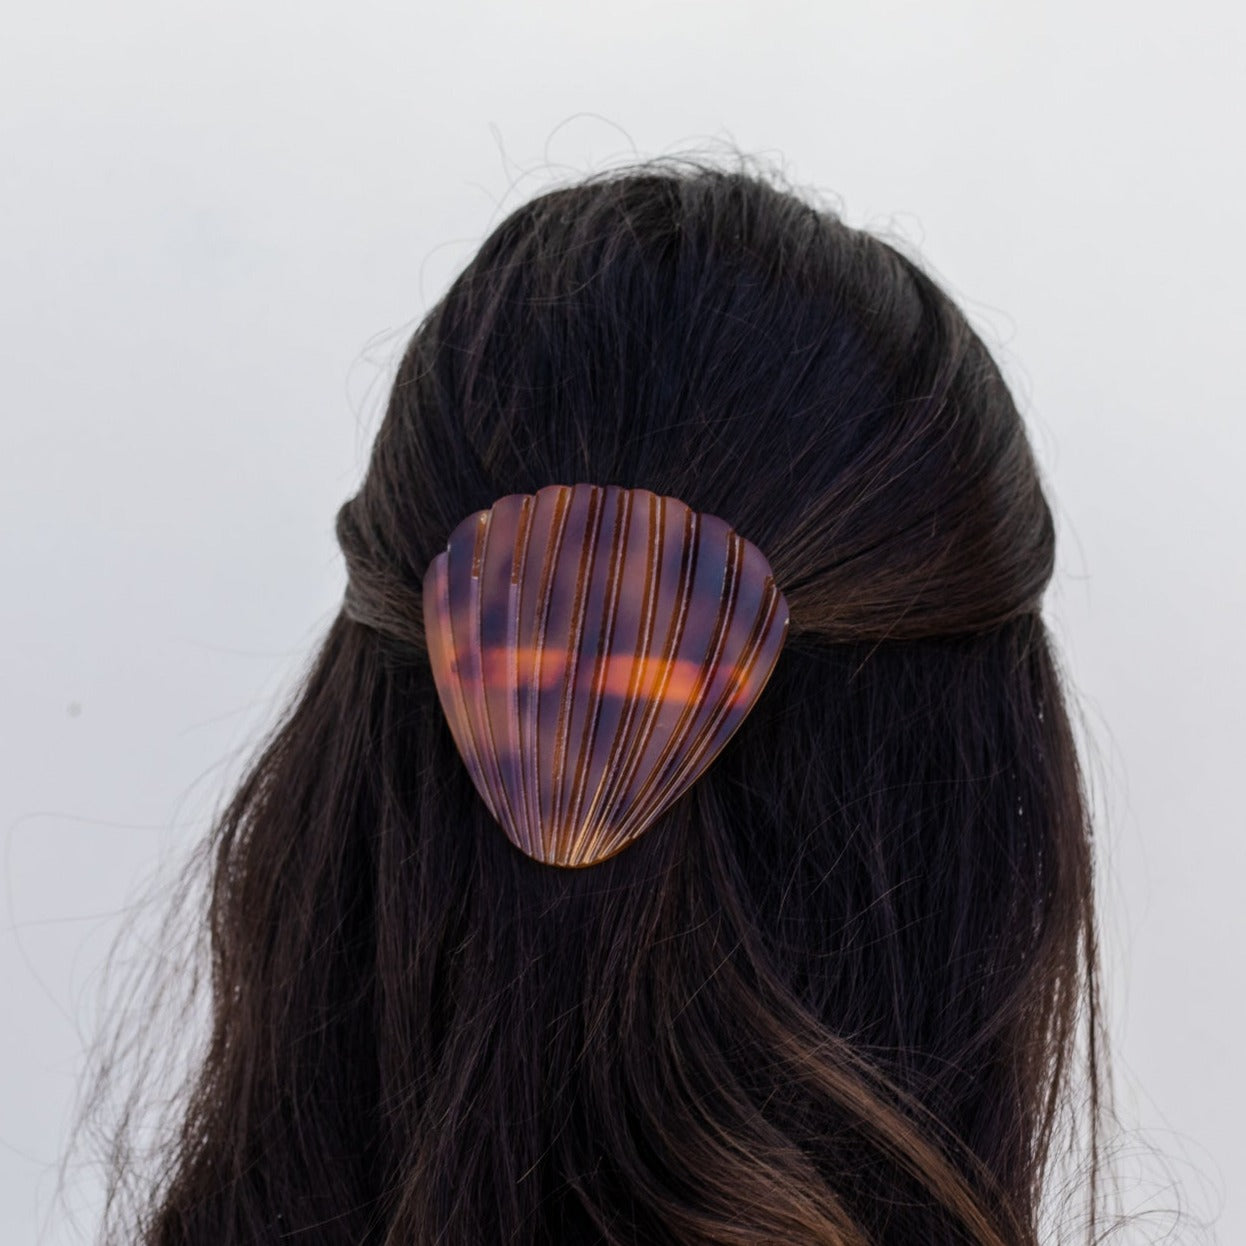 Girl with dark brown hear wearing a brown tortoise seashell hair clip with her hair half up, against a white background